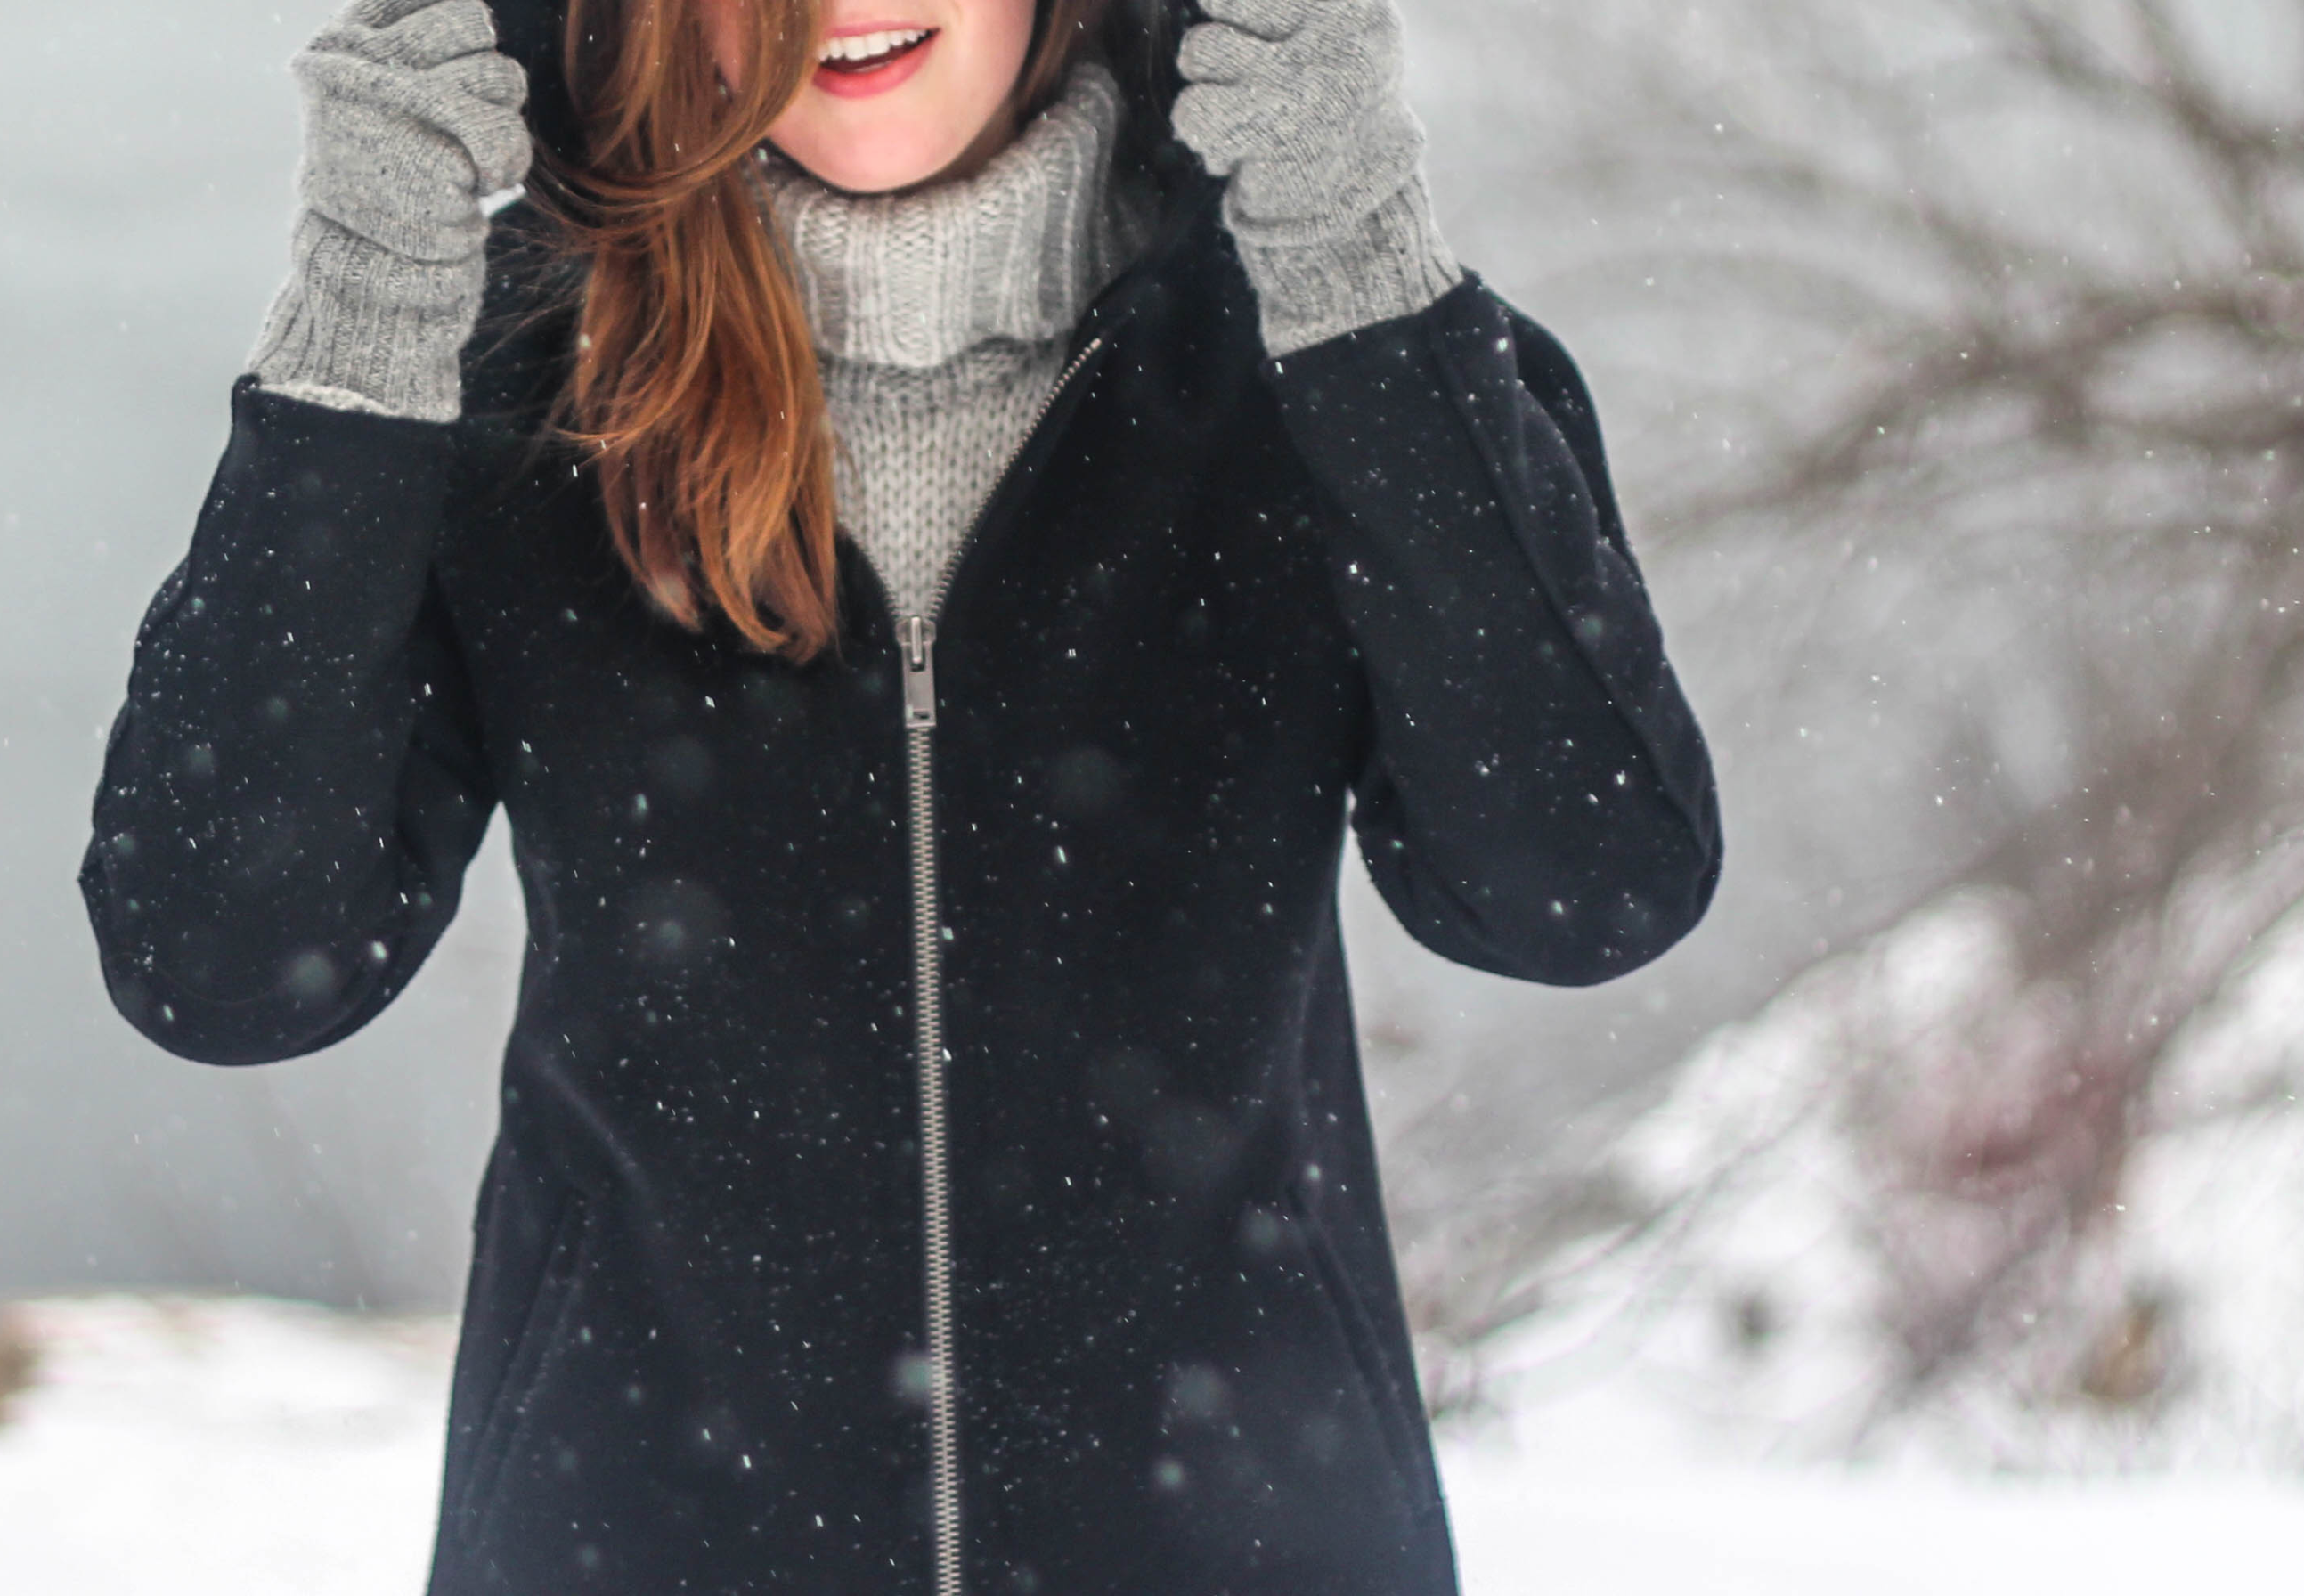 How to Properly Clean Your Winter Coat